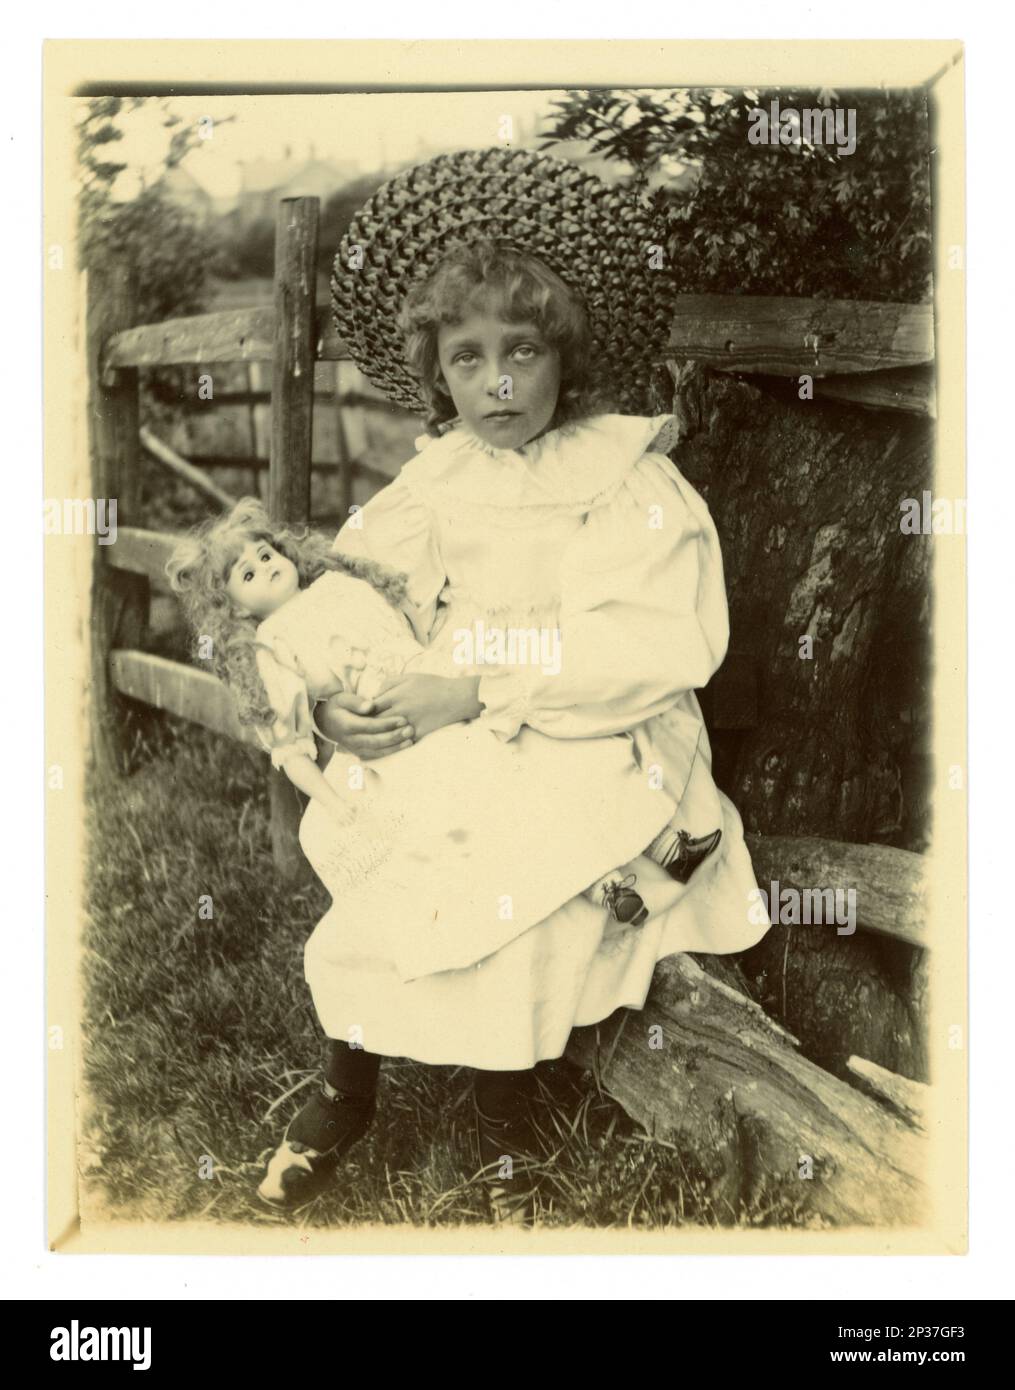 Original Victorian photograph of a young girl with disabilities & a new doll, from a wealthy family sitting outside in a garden, circa 1898, Worcester area, U.K. Stock Photo